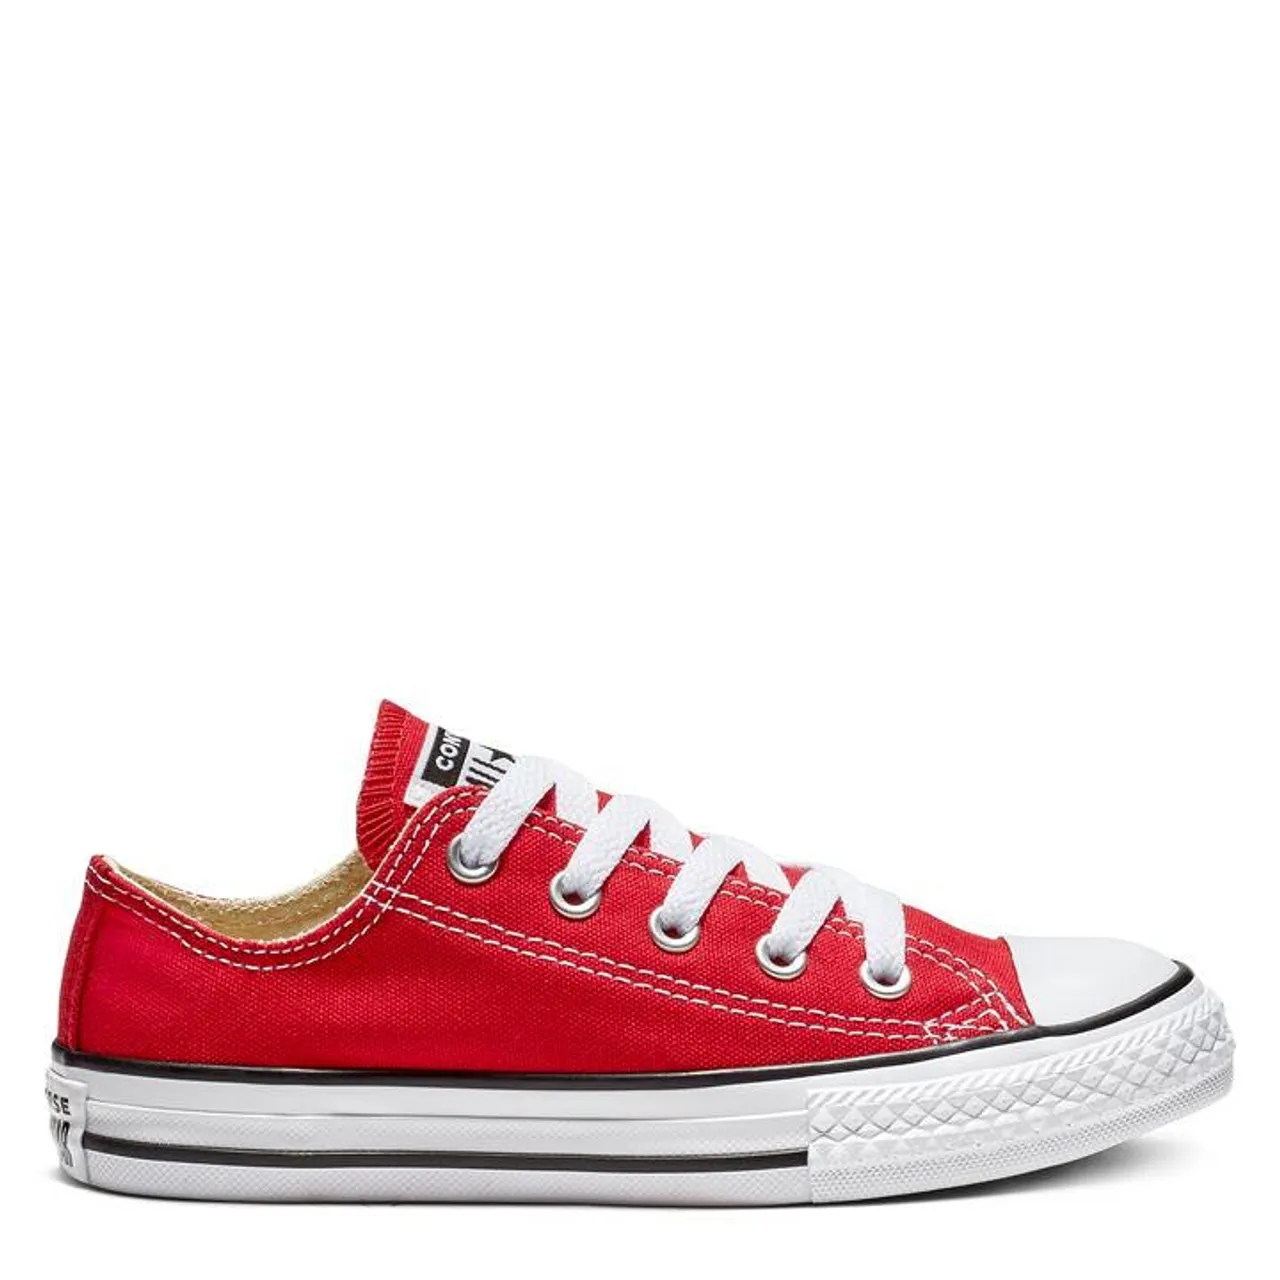 Converse Chuck Low Cut Canvas - Red